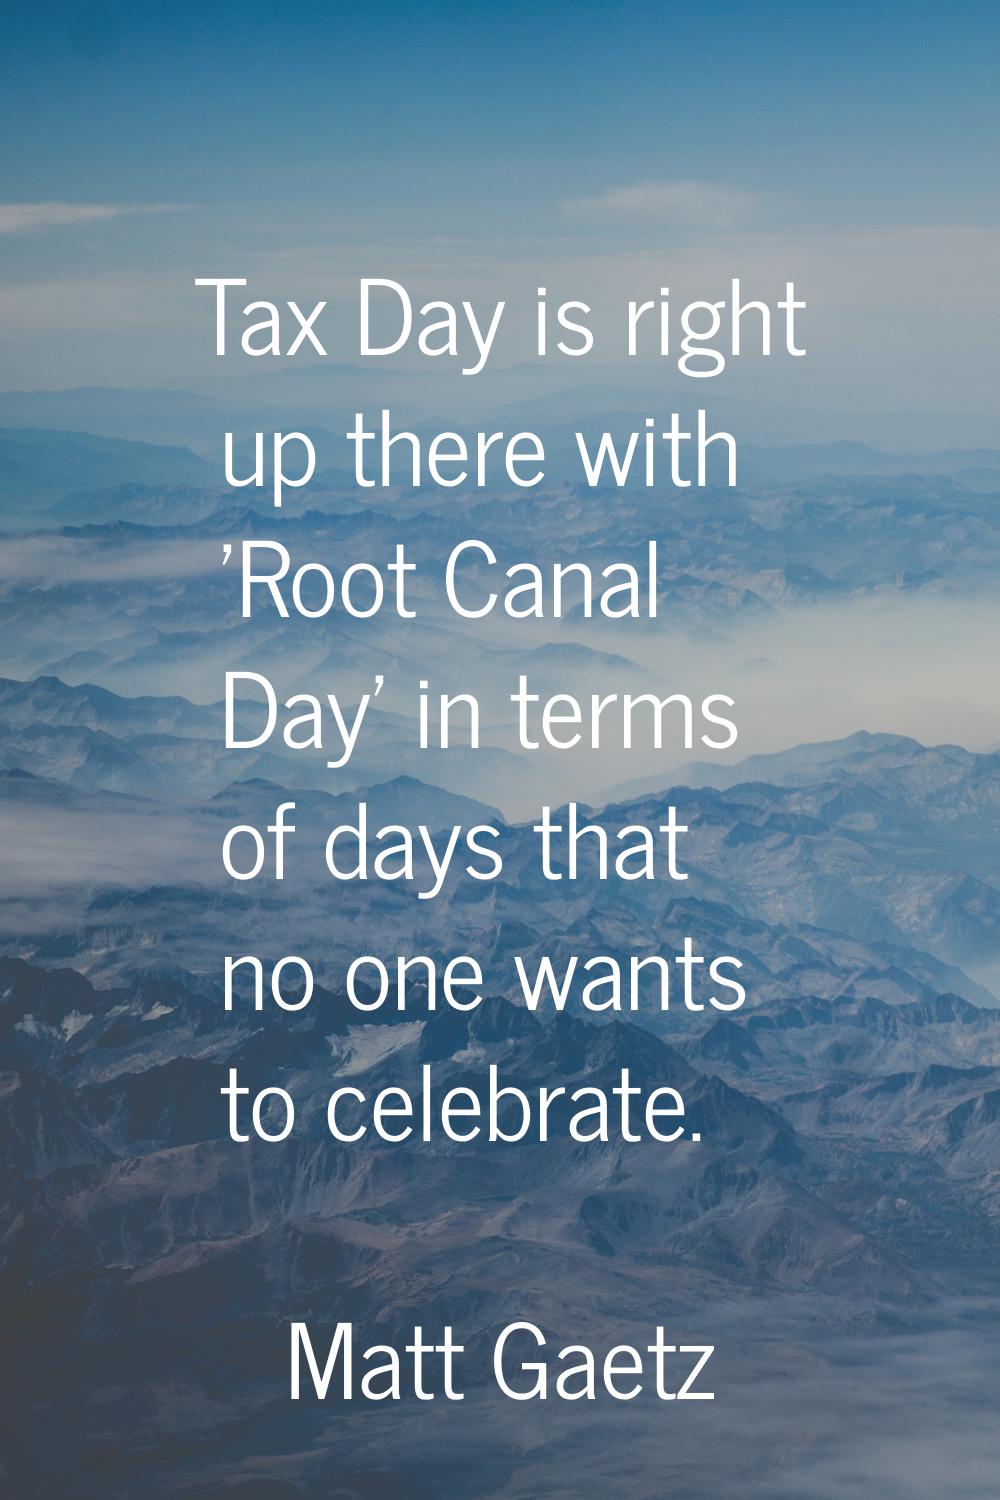 Tax Day is right up there with 'Root Canal Day' in terms of days that no one wants to celebrate.